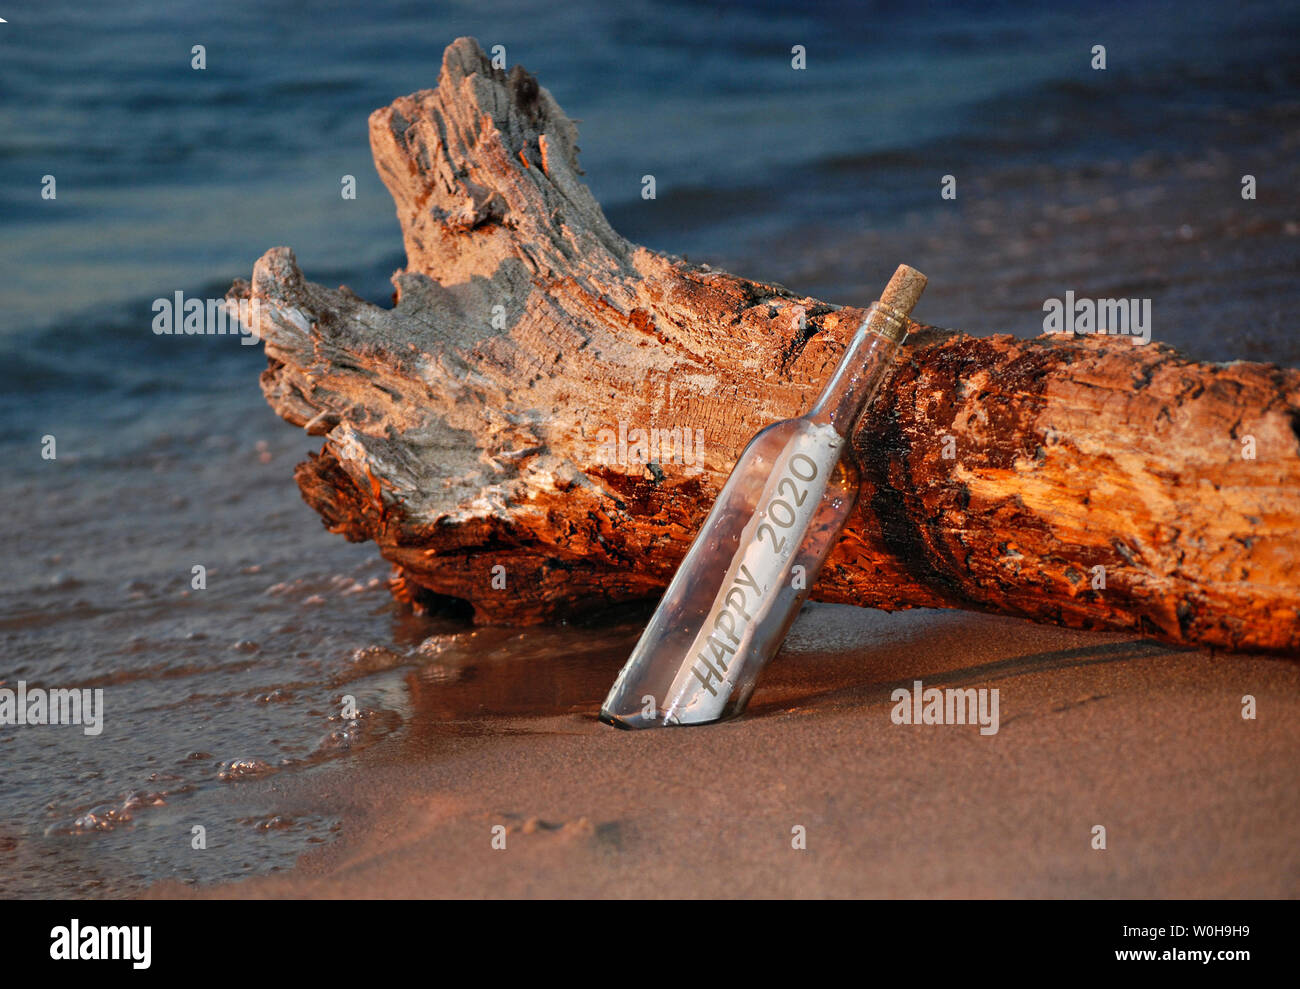 New Year 2020 message in a bottle on weathered driftwood log in sunset glow on beach Stock Photo